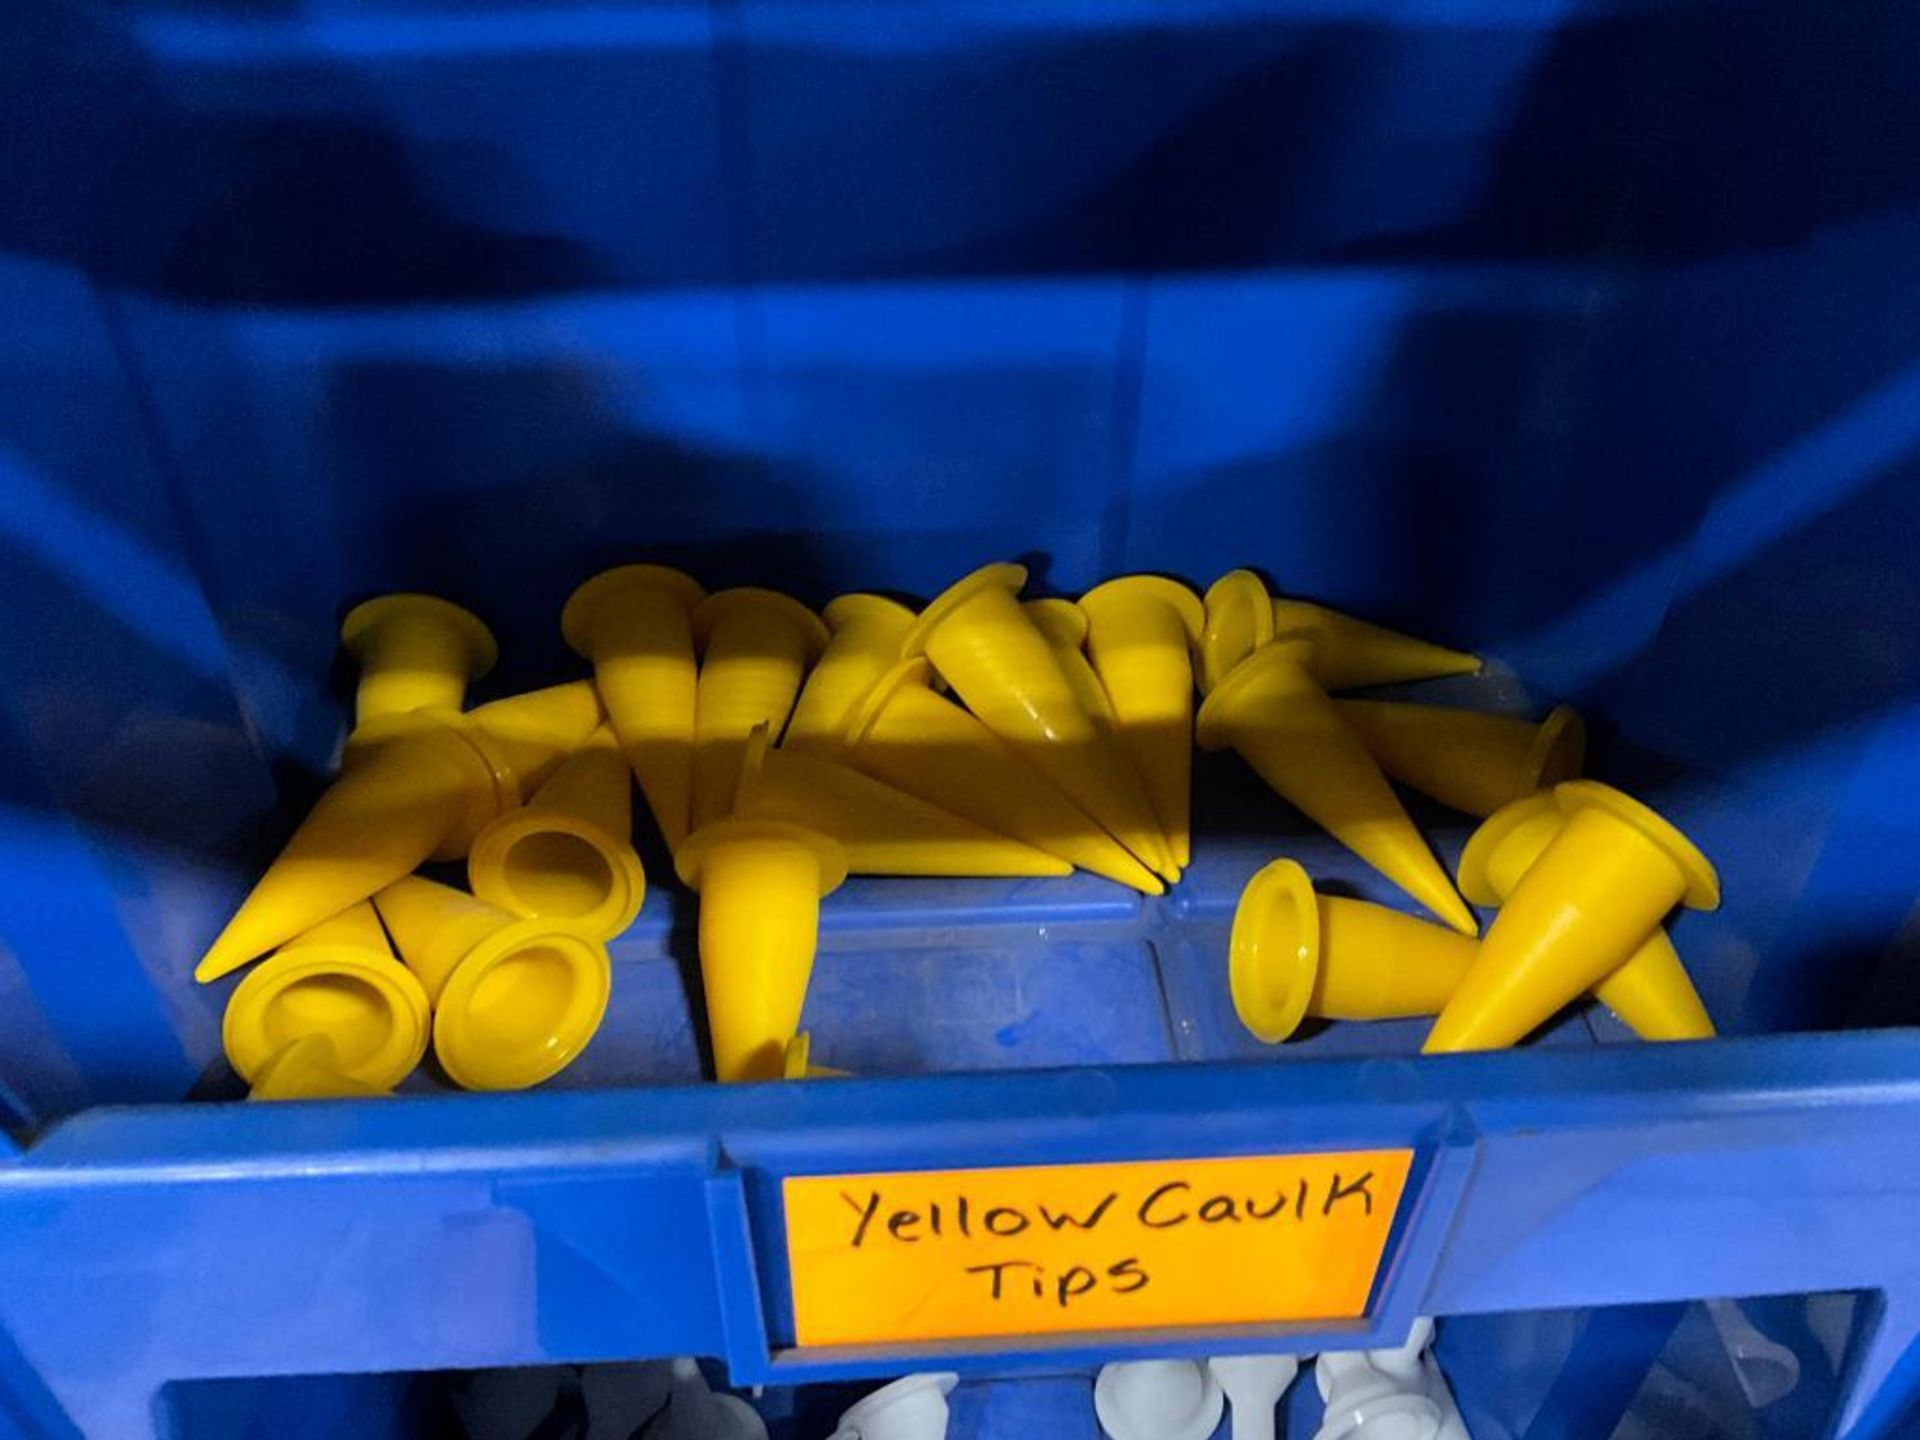 Gloves of all Sizes, Shrink Wrap, Caution Tape, Door Push Handle, Kitchen towels, (2) Storage Racks, - Image 37 of 50